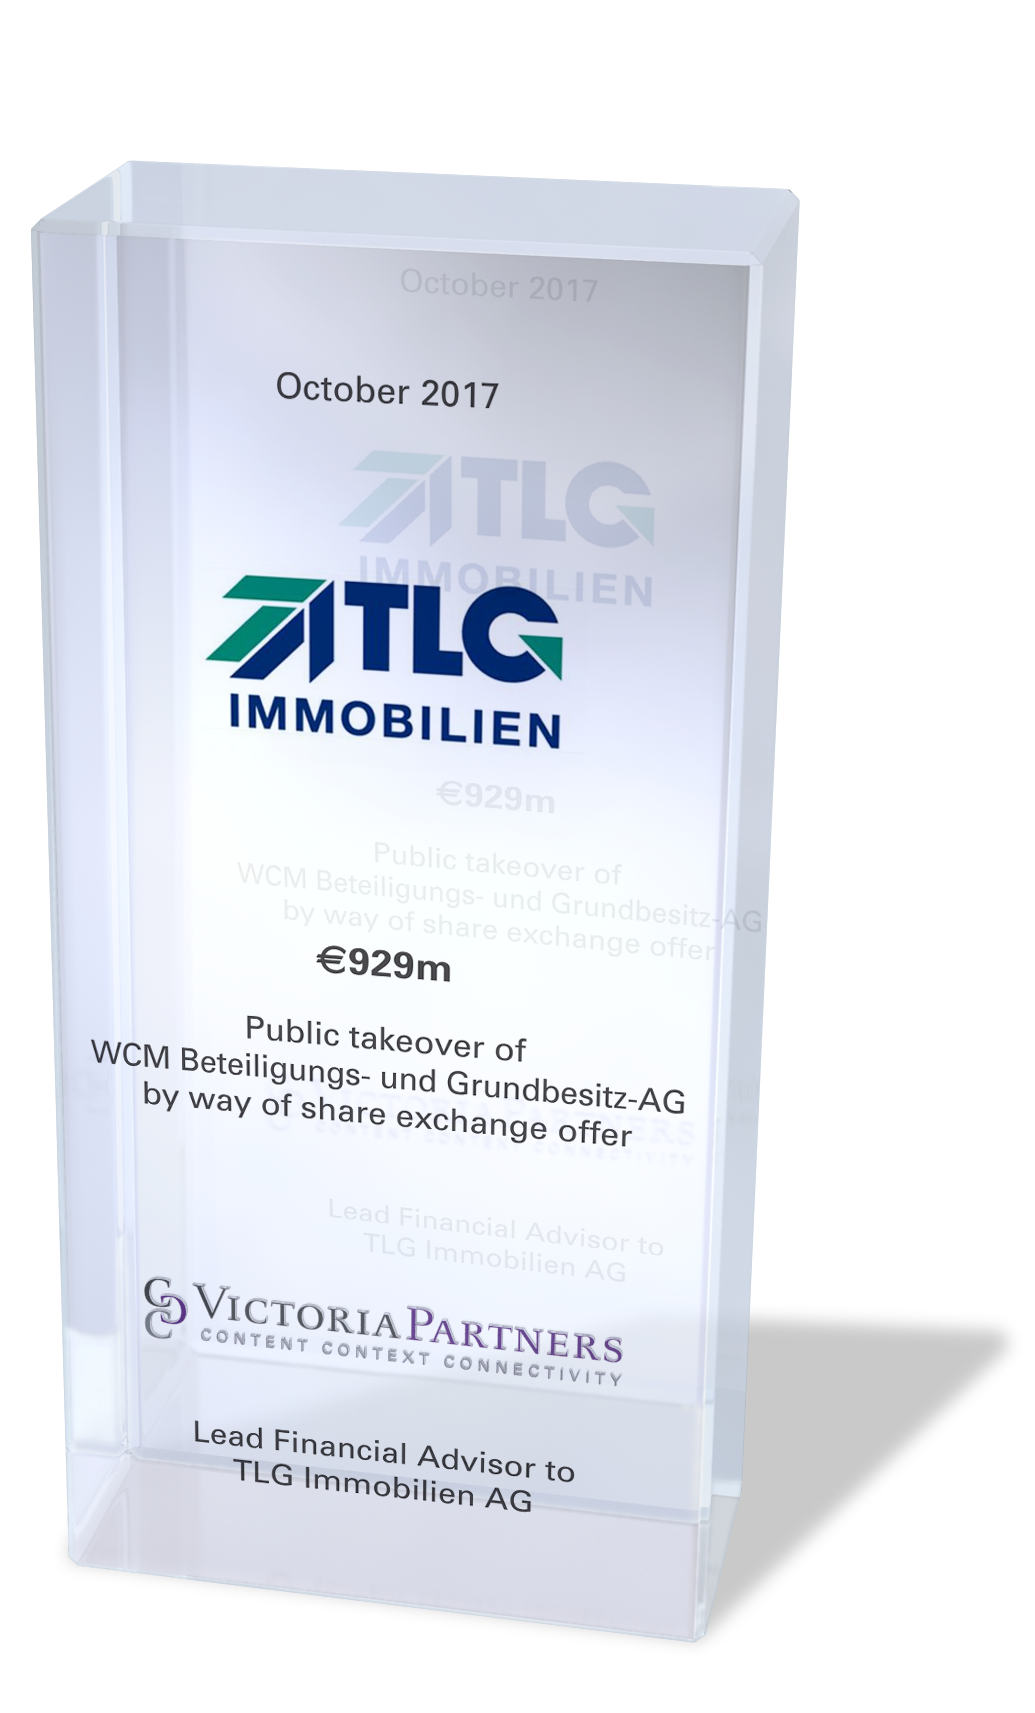 VICTORIAPARTNERS - Lead Financial Advisor to TLG Immobilien AG - October 2017